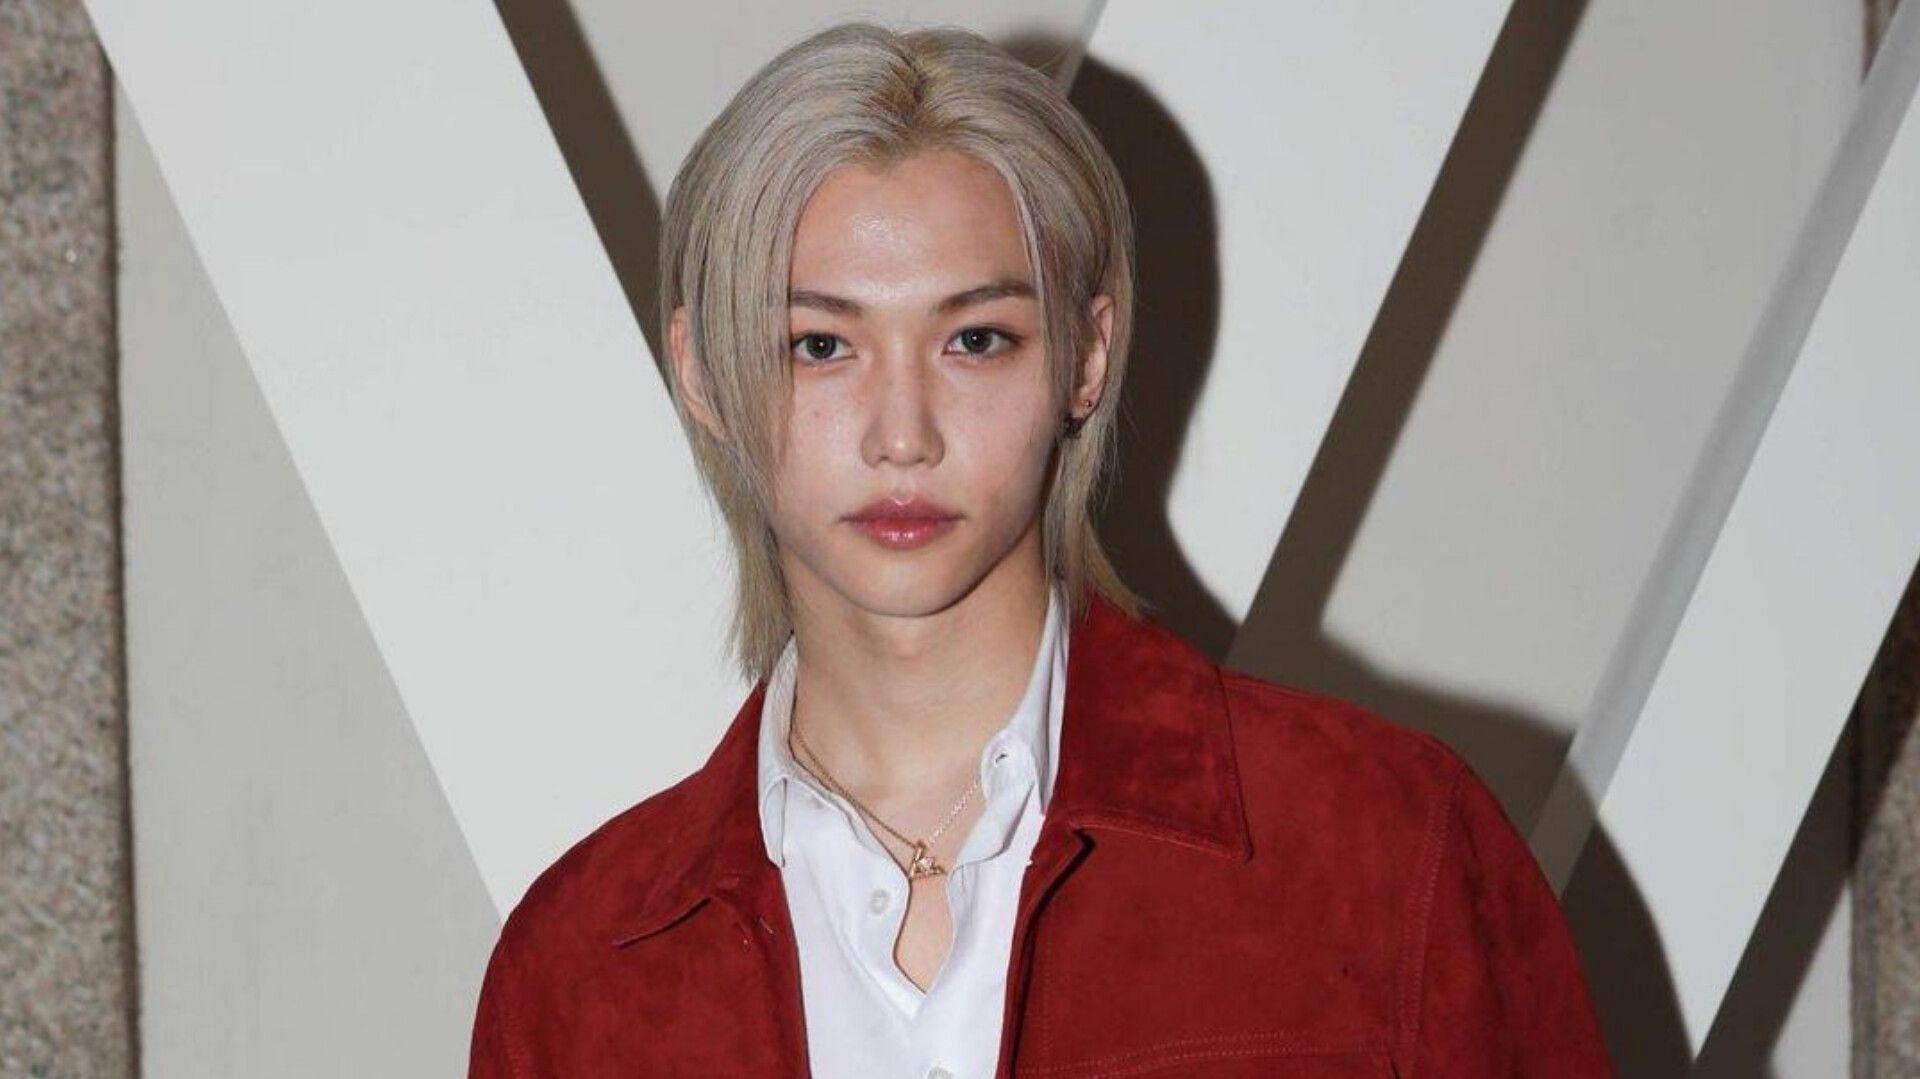 JYPE PROTECT YOUR ARTISTS trends as fans urged agency to protect Stray Kids'  Felix against life threatening posts